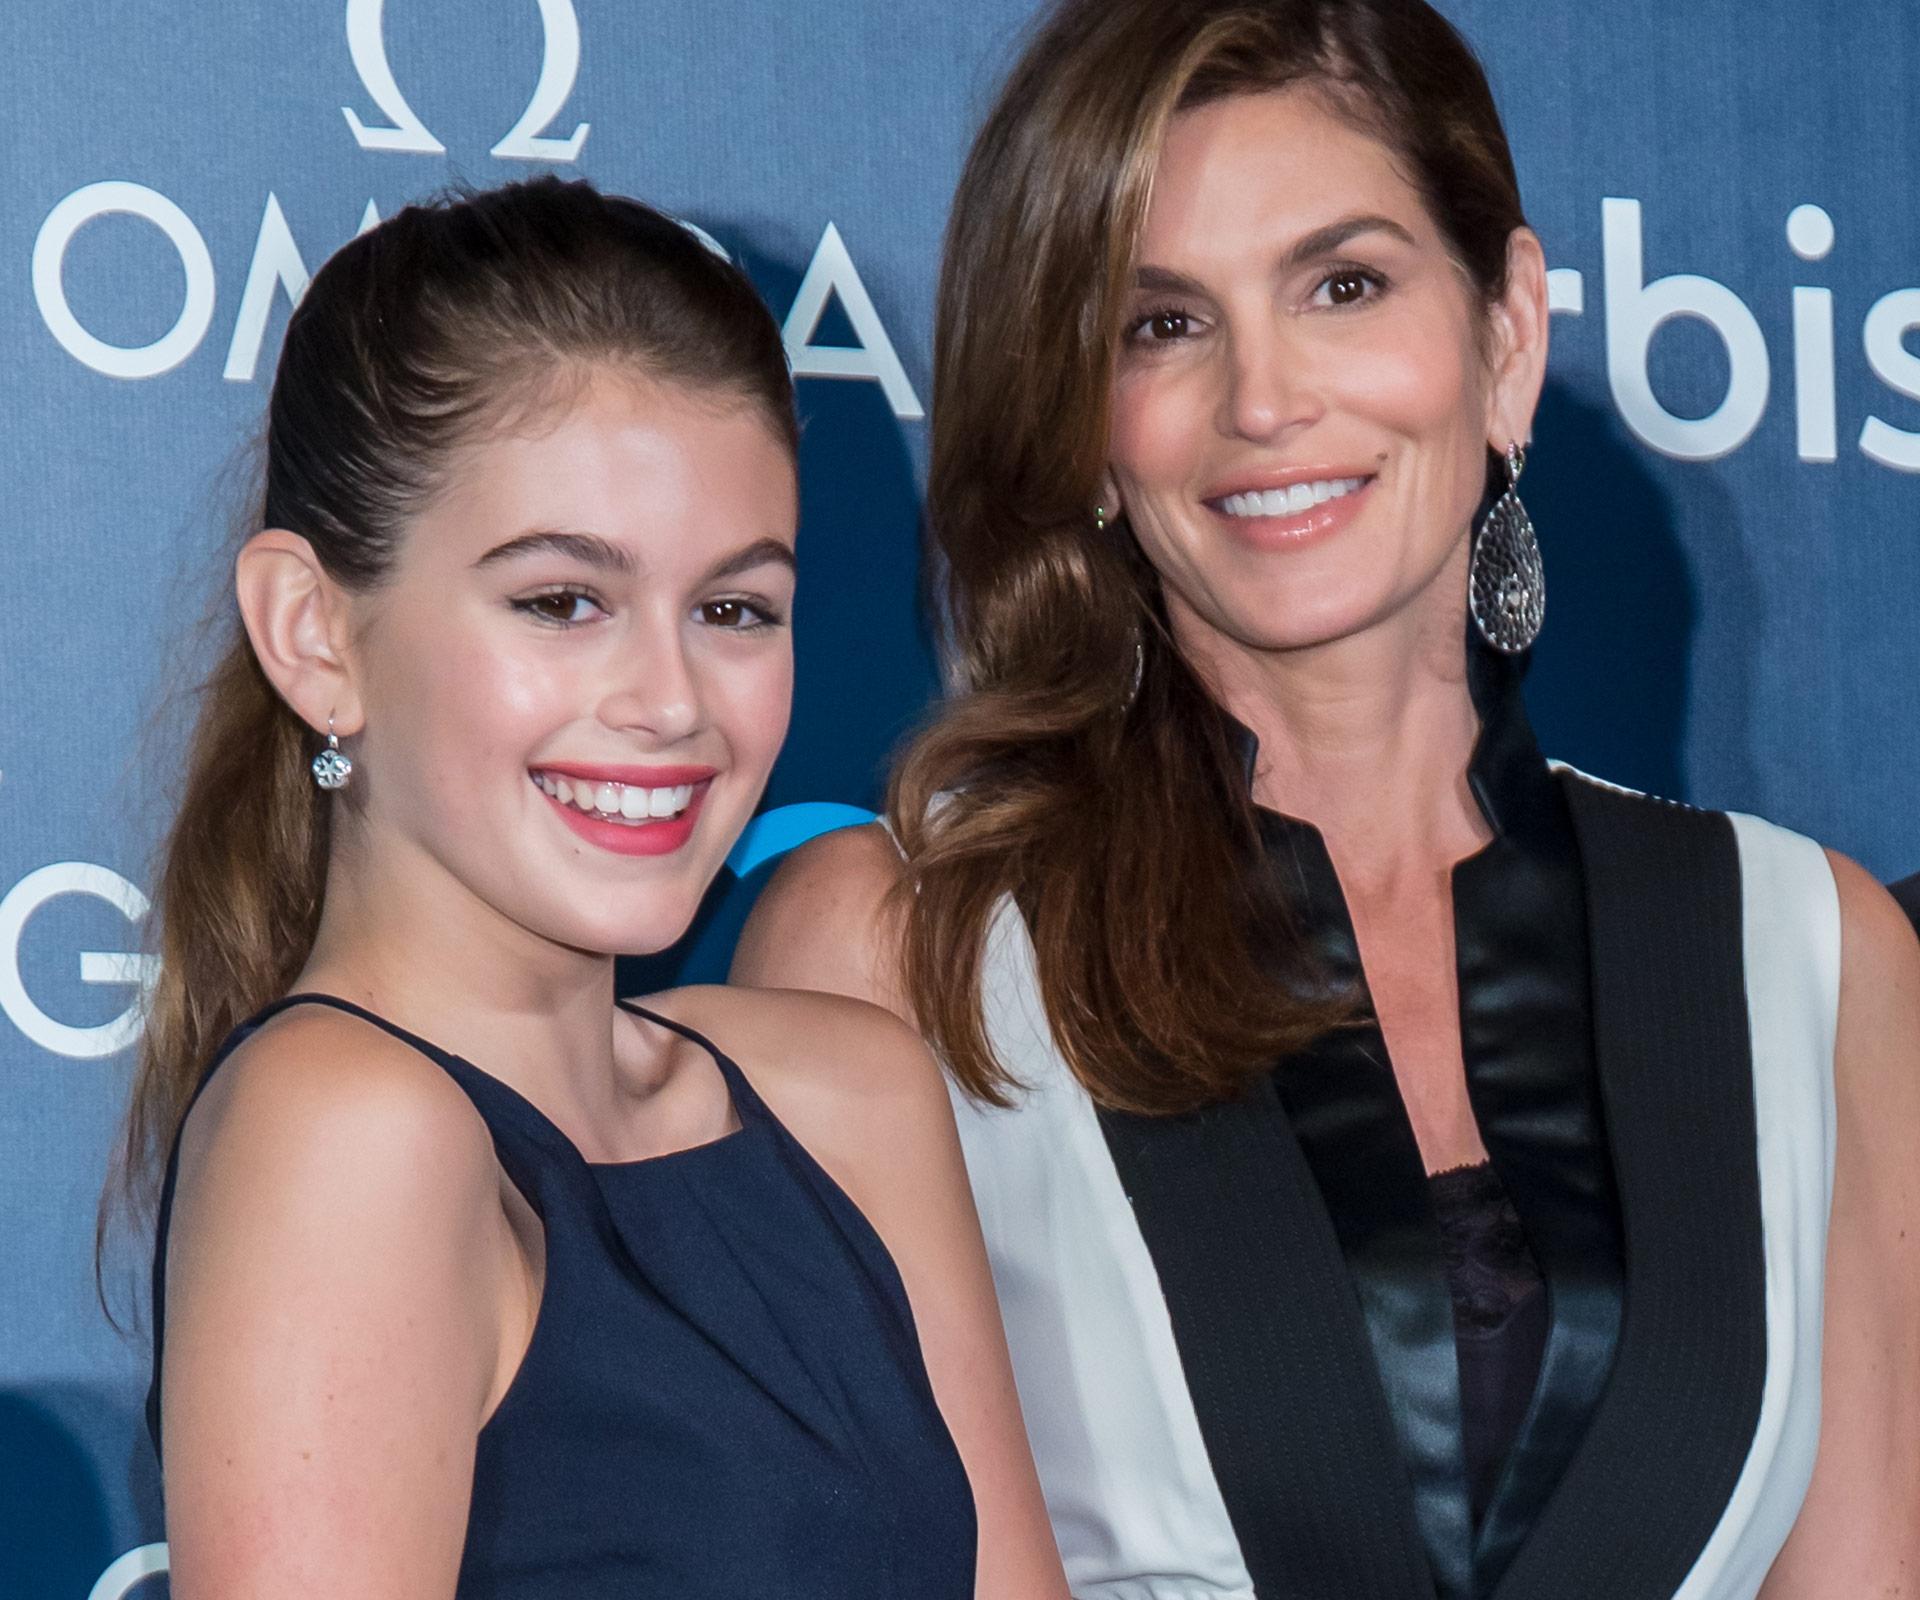 Kaia Gerber covers Vogue with model mum Cindy Crawford